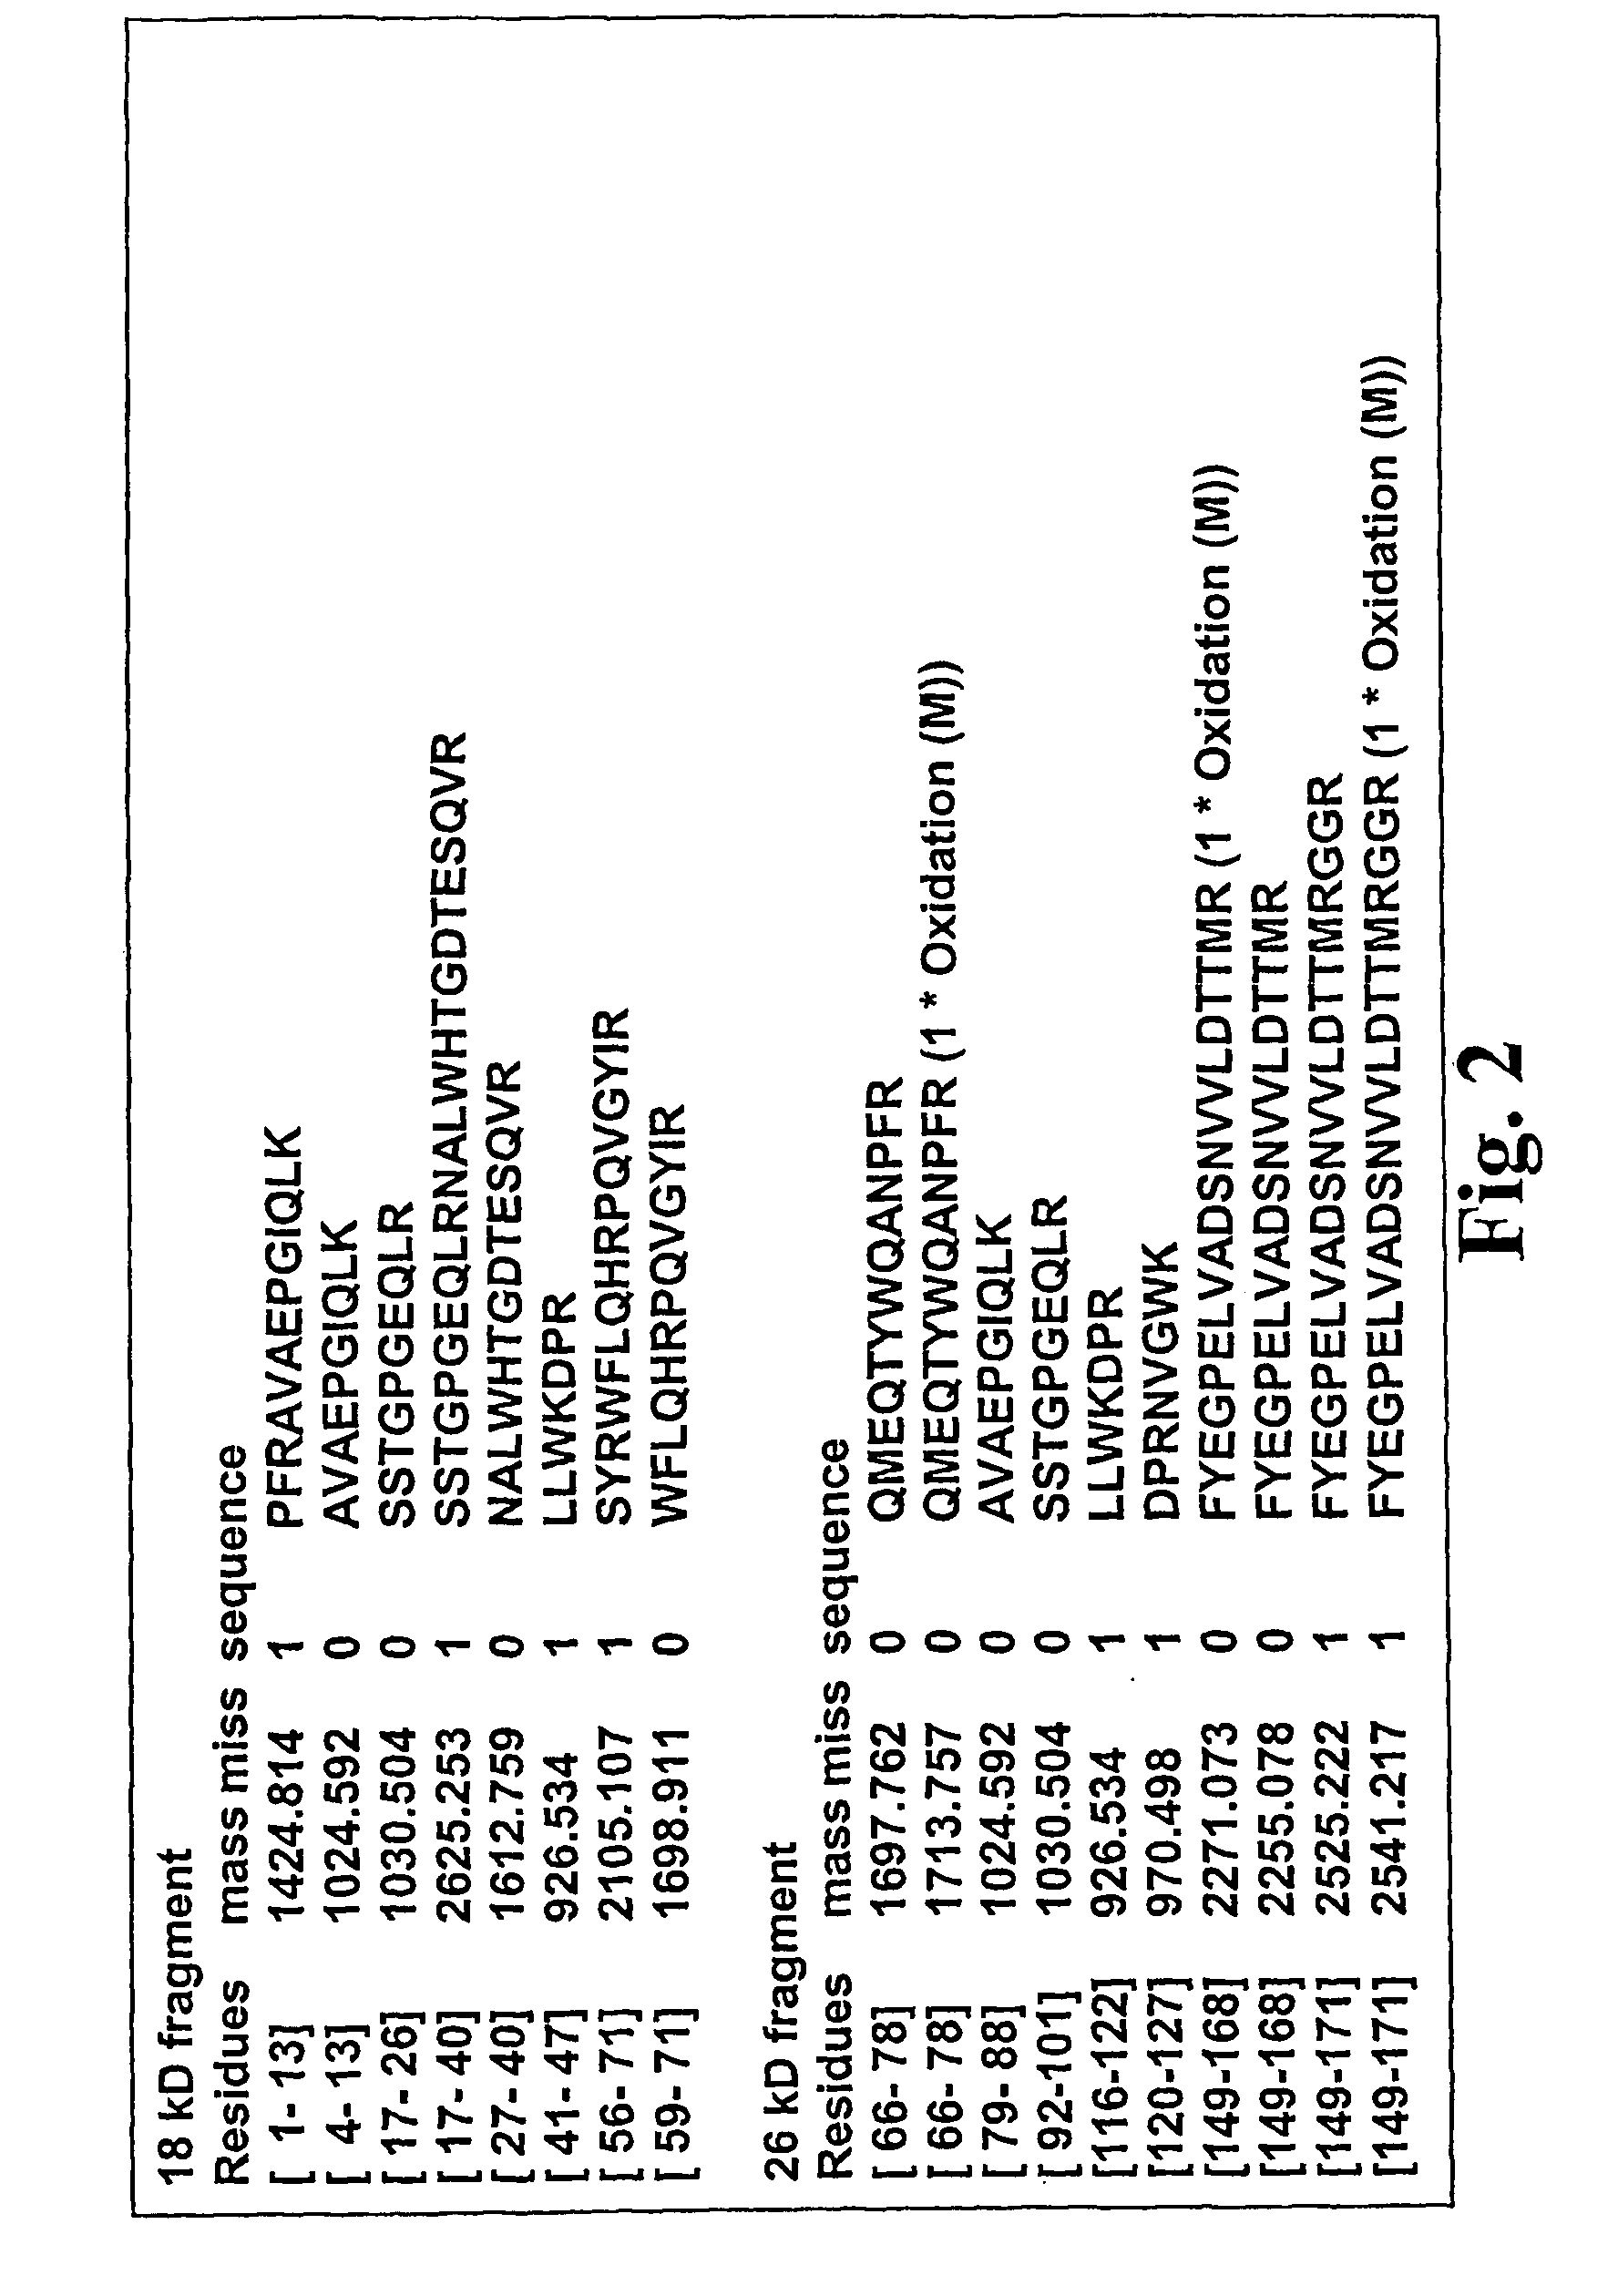 Method for Determining a Tissue Degradation Process by Detection of Comp Neoepitopes